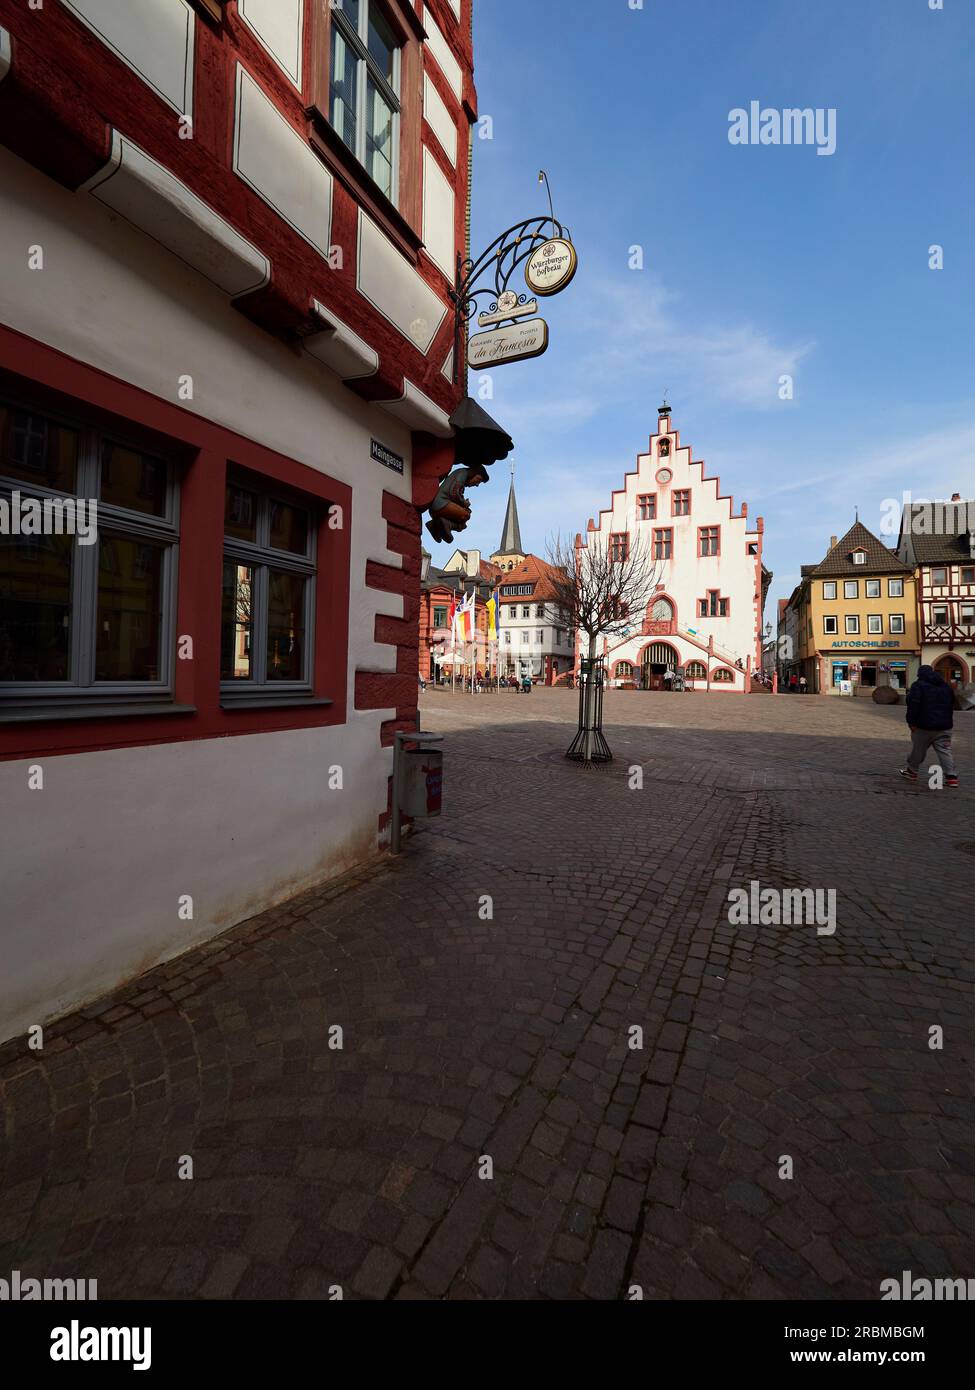 Historic town hall of Karlstadt am Main, Main-Spessart district, Lower Franconia, Bavaria, Germany Stock Photo